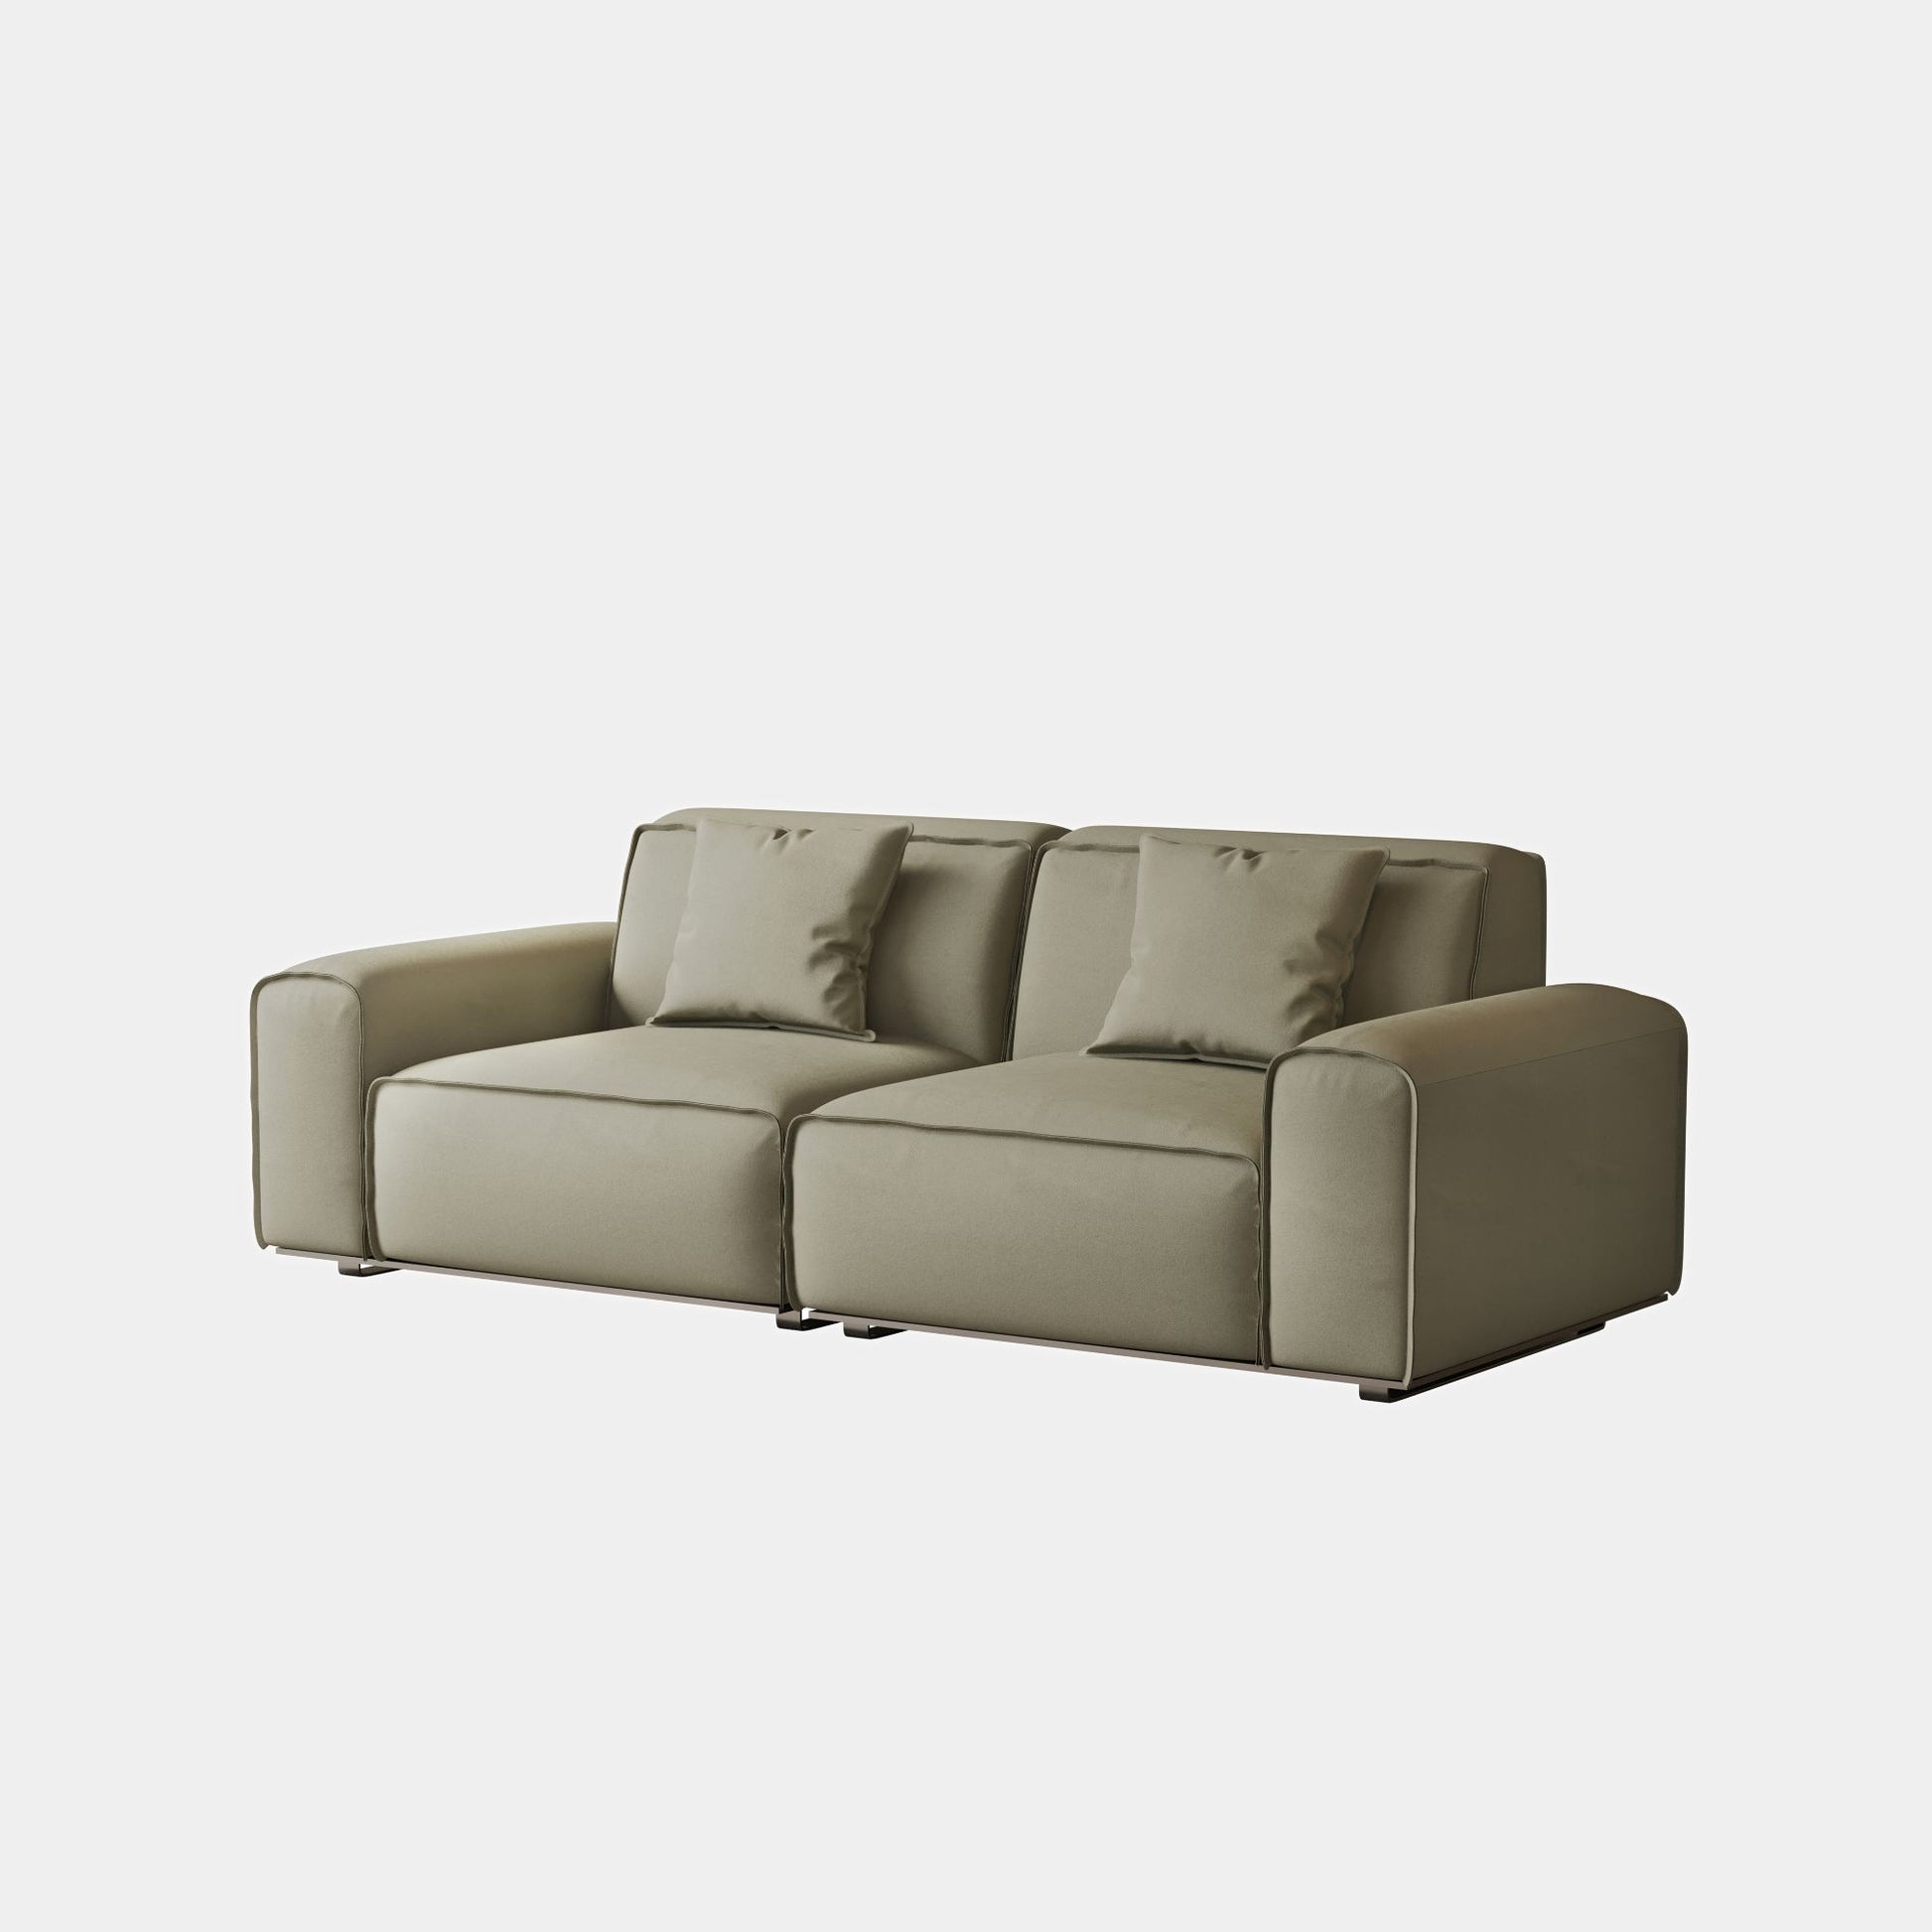 Colby white top grain full leather 2 seat sofa